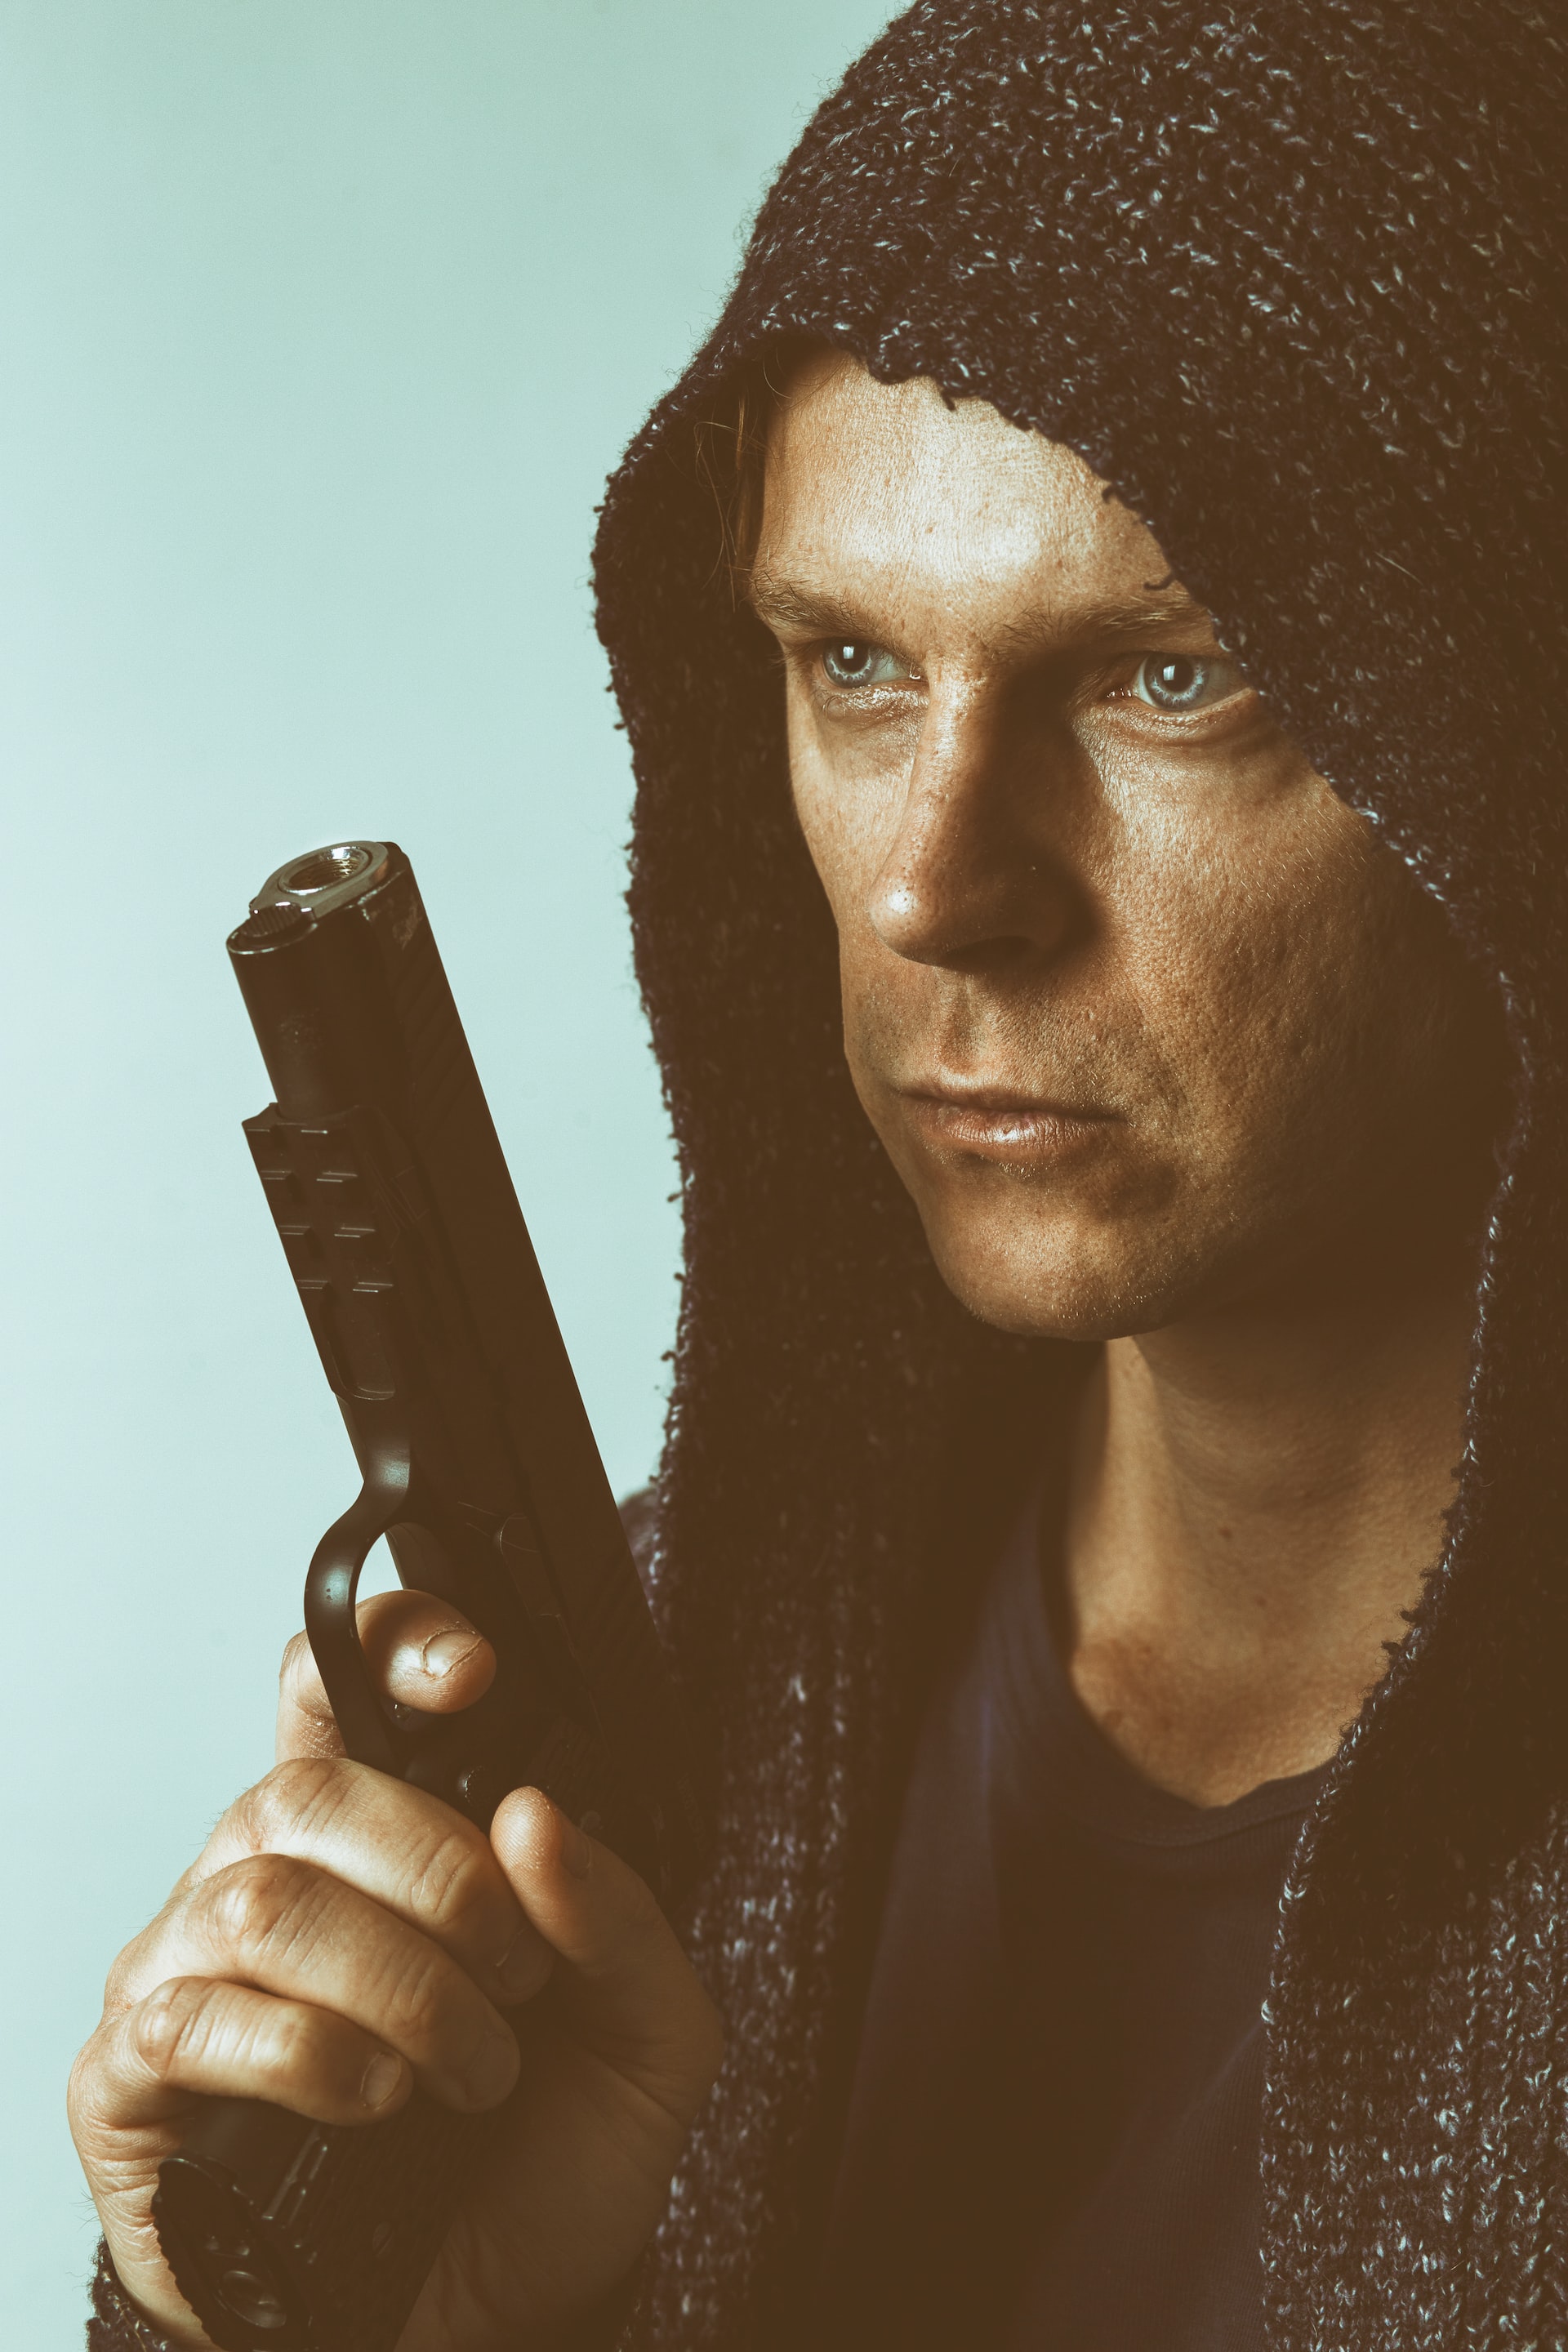 A hooded man is holding a pistol in his hand